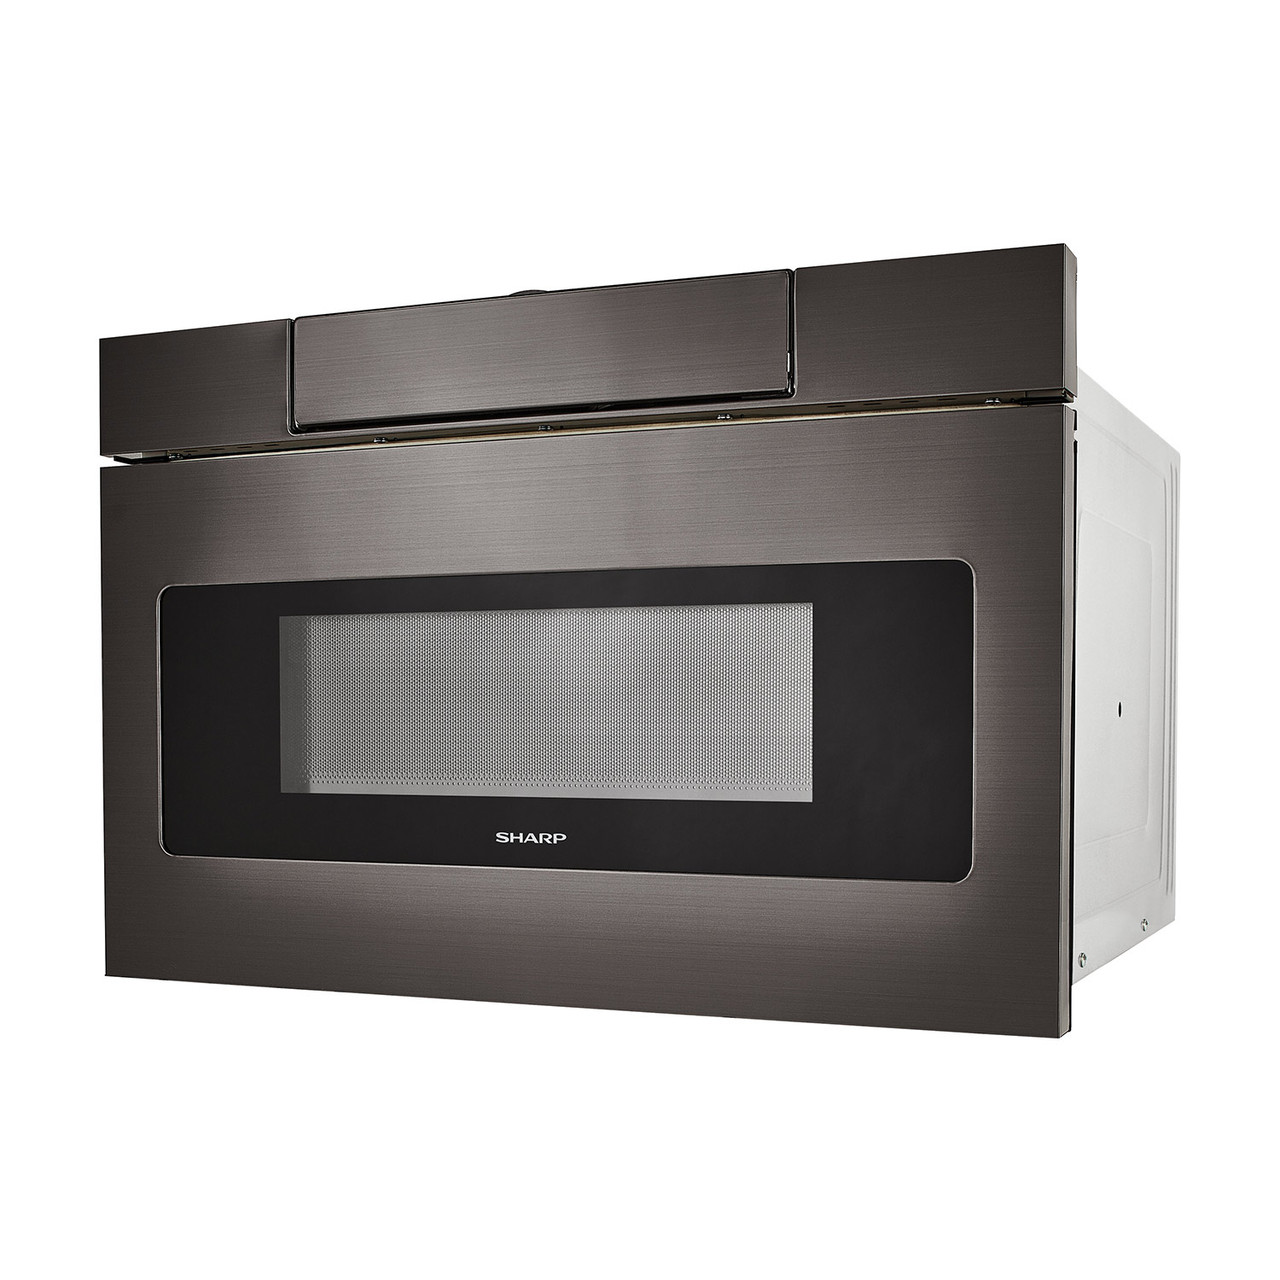 24 in. Black Stainless Steel Microwave Drawer (SMD2470AH) – left side view